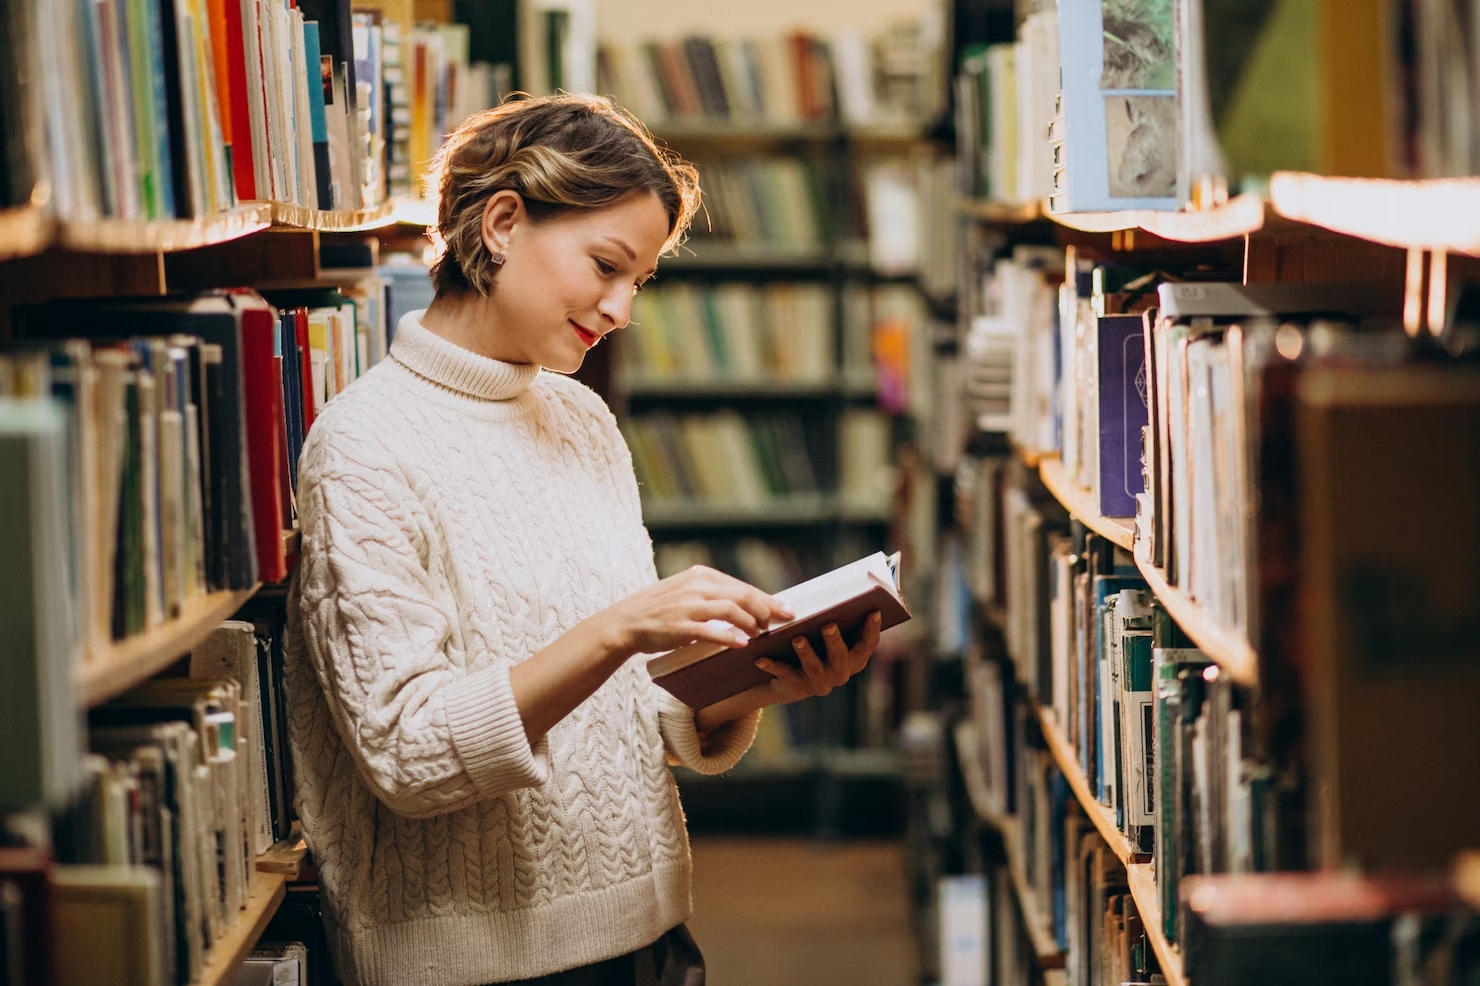 11 Book Recommendations for College Students from Harrington Housing